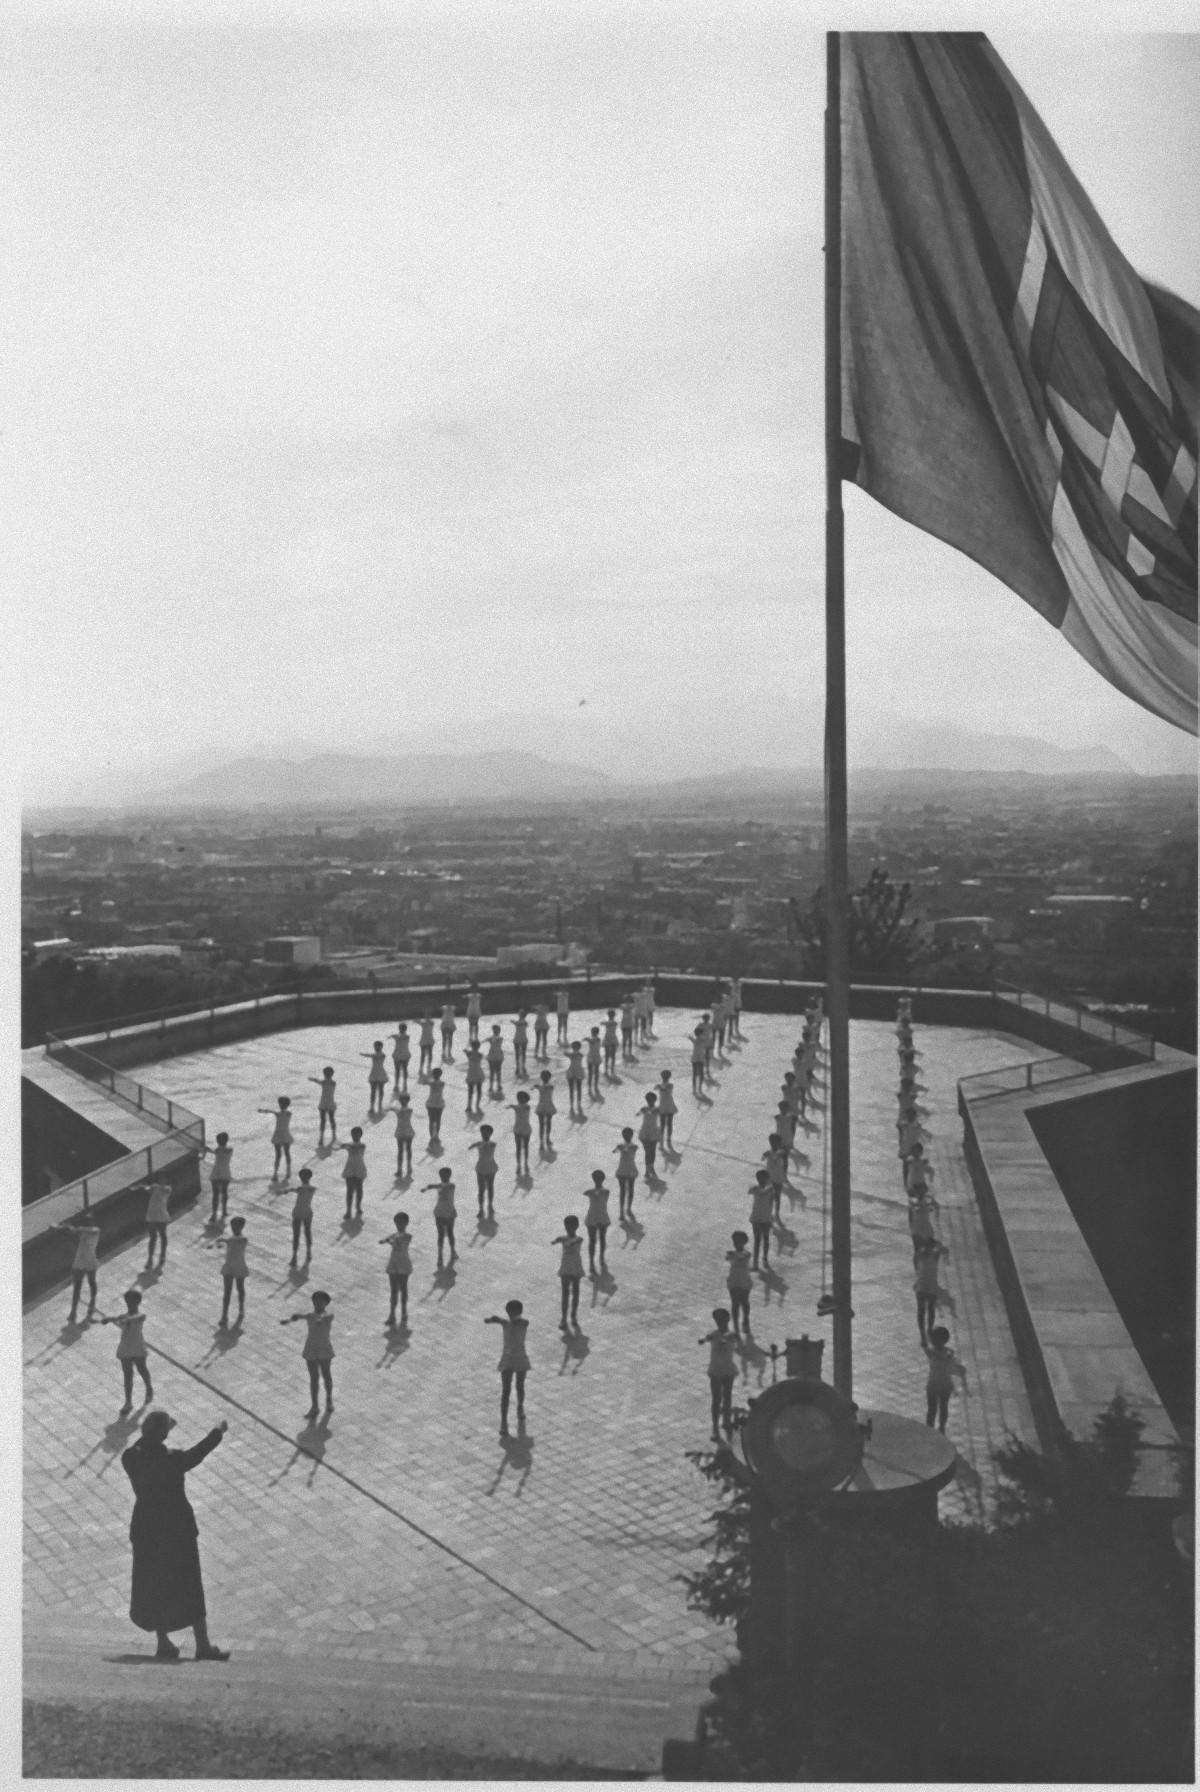 Unknown Landscape Photograph - Gymnastics in a Stadium During Fascism in Italy - Vintage b/w Photo - 1934